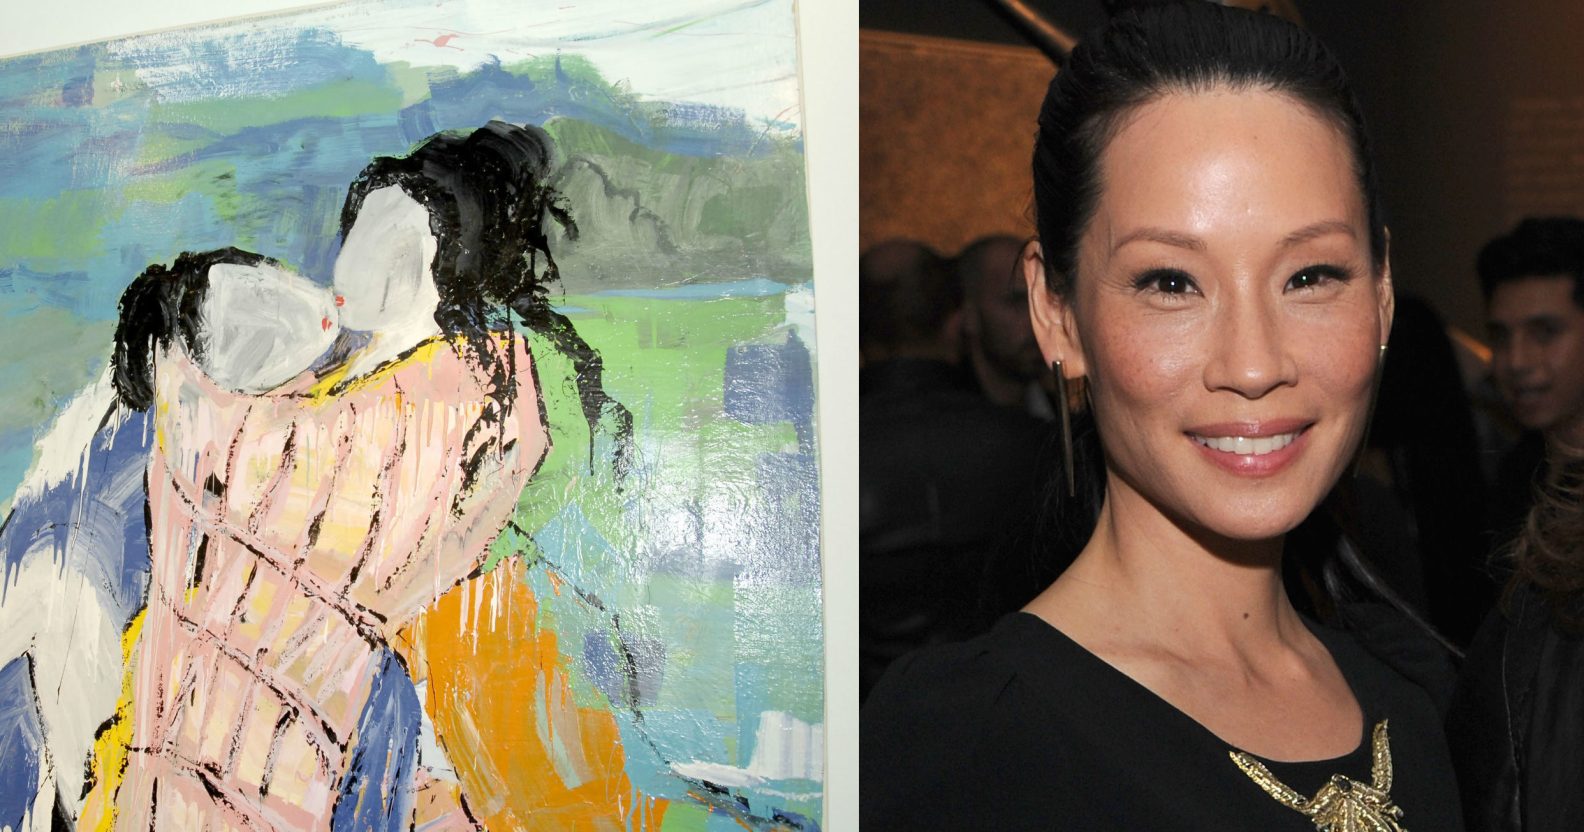 Lucy Liu Upskirt - Lucy Liu has 'gorgeous' nudes of Drew Barrymore from 'Charlie's Angels' set  | CNN